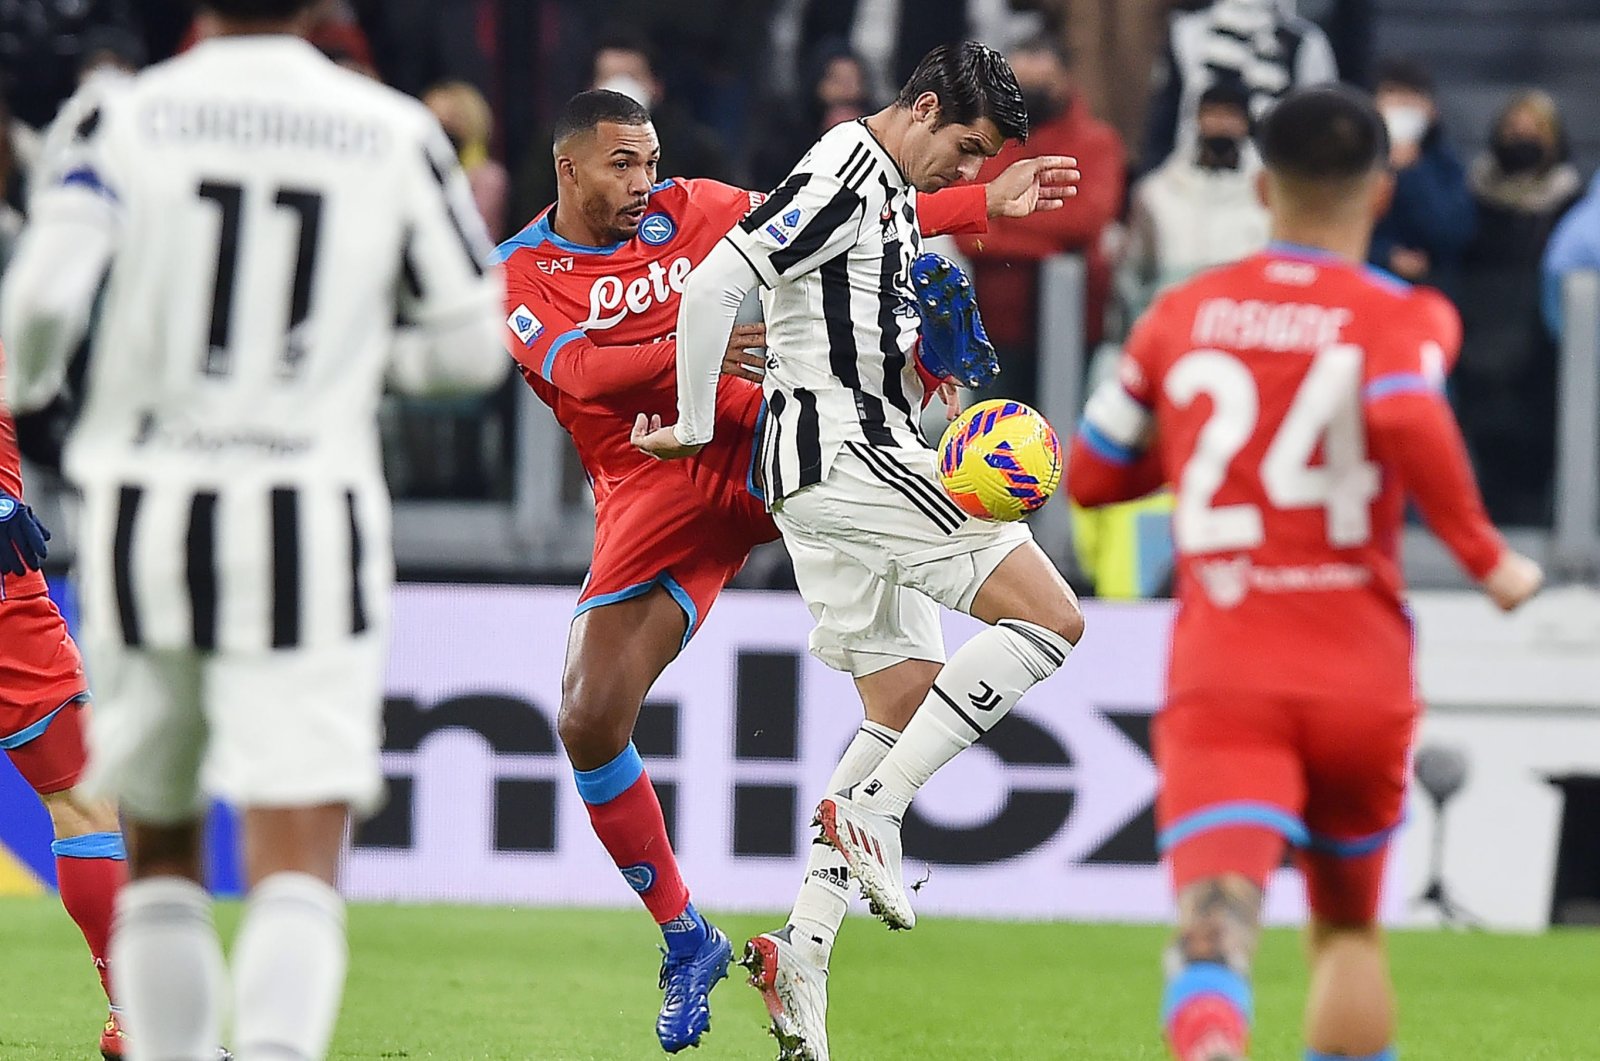 Juventus’ Alvaro Morata (CR) and Napoli’s Juan Jesus (CL) in action during a Serie A match in Turin, Italy, Jan. 6, 2022. (EPA Photo)